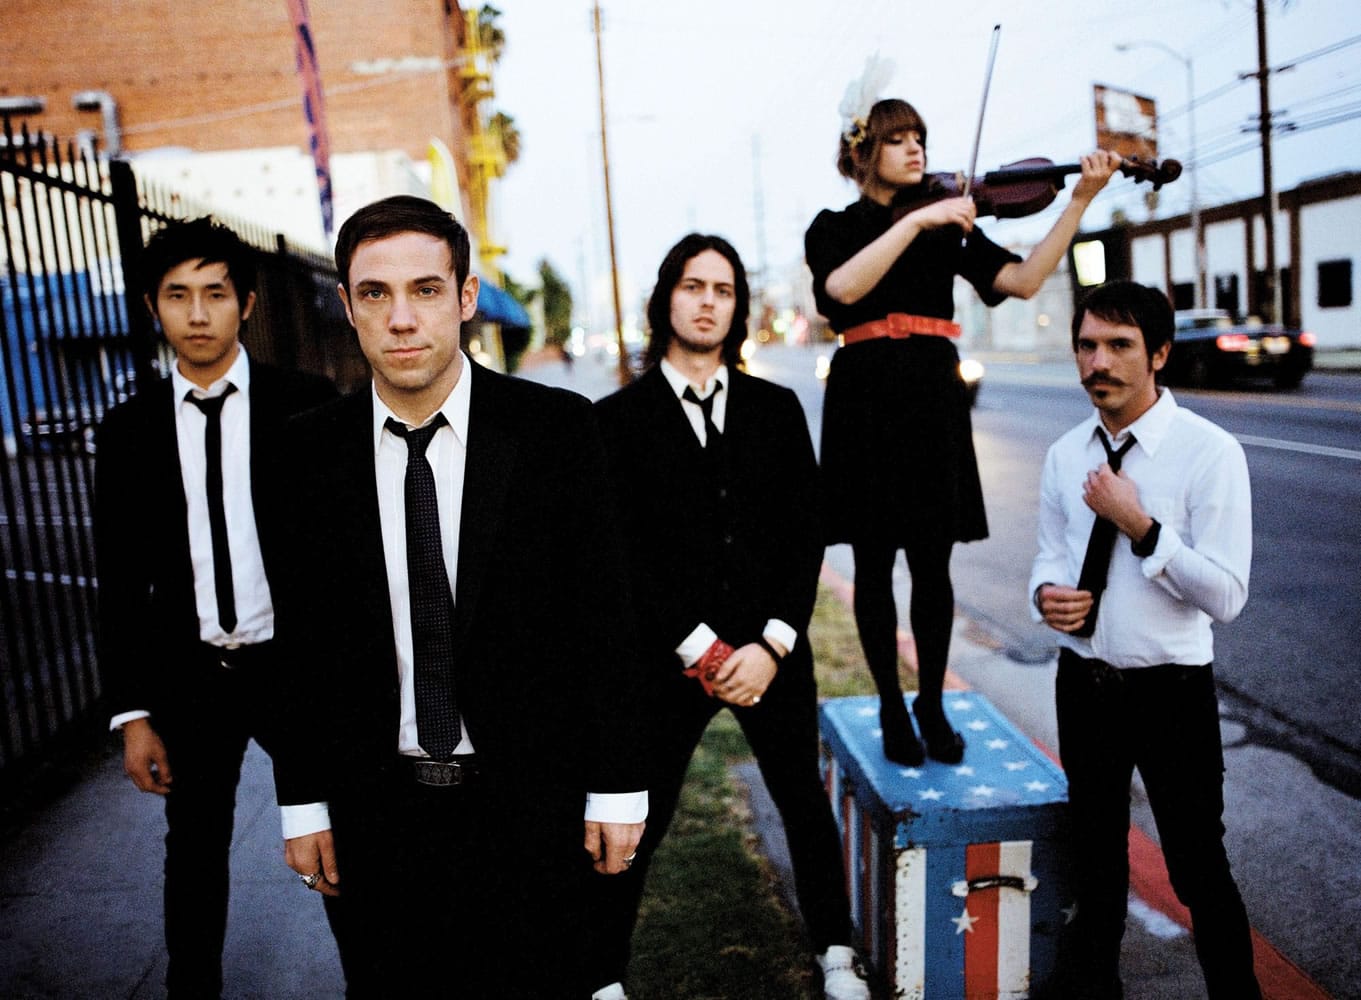 The Airborne Toxic Event will perform June 9 at the Wonder Ballroom in Portland.